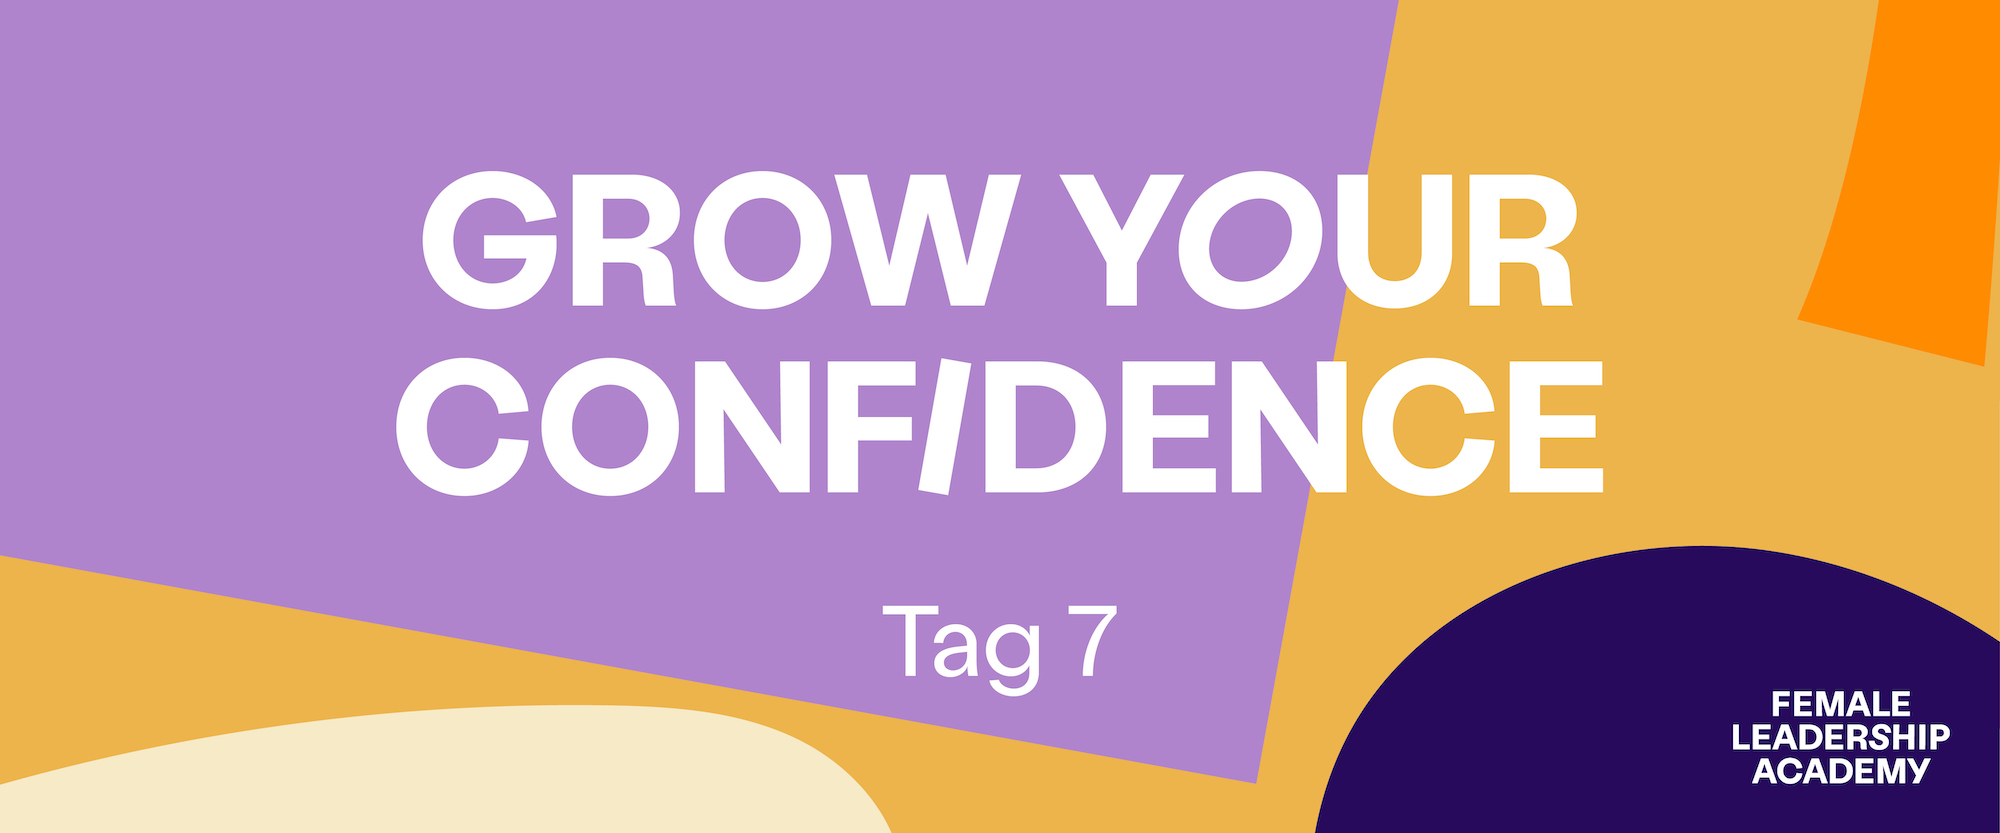 Grow your Confidence - Tag 7